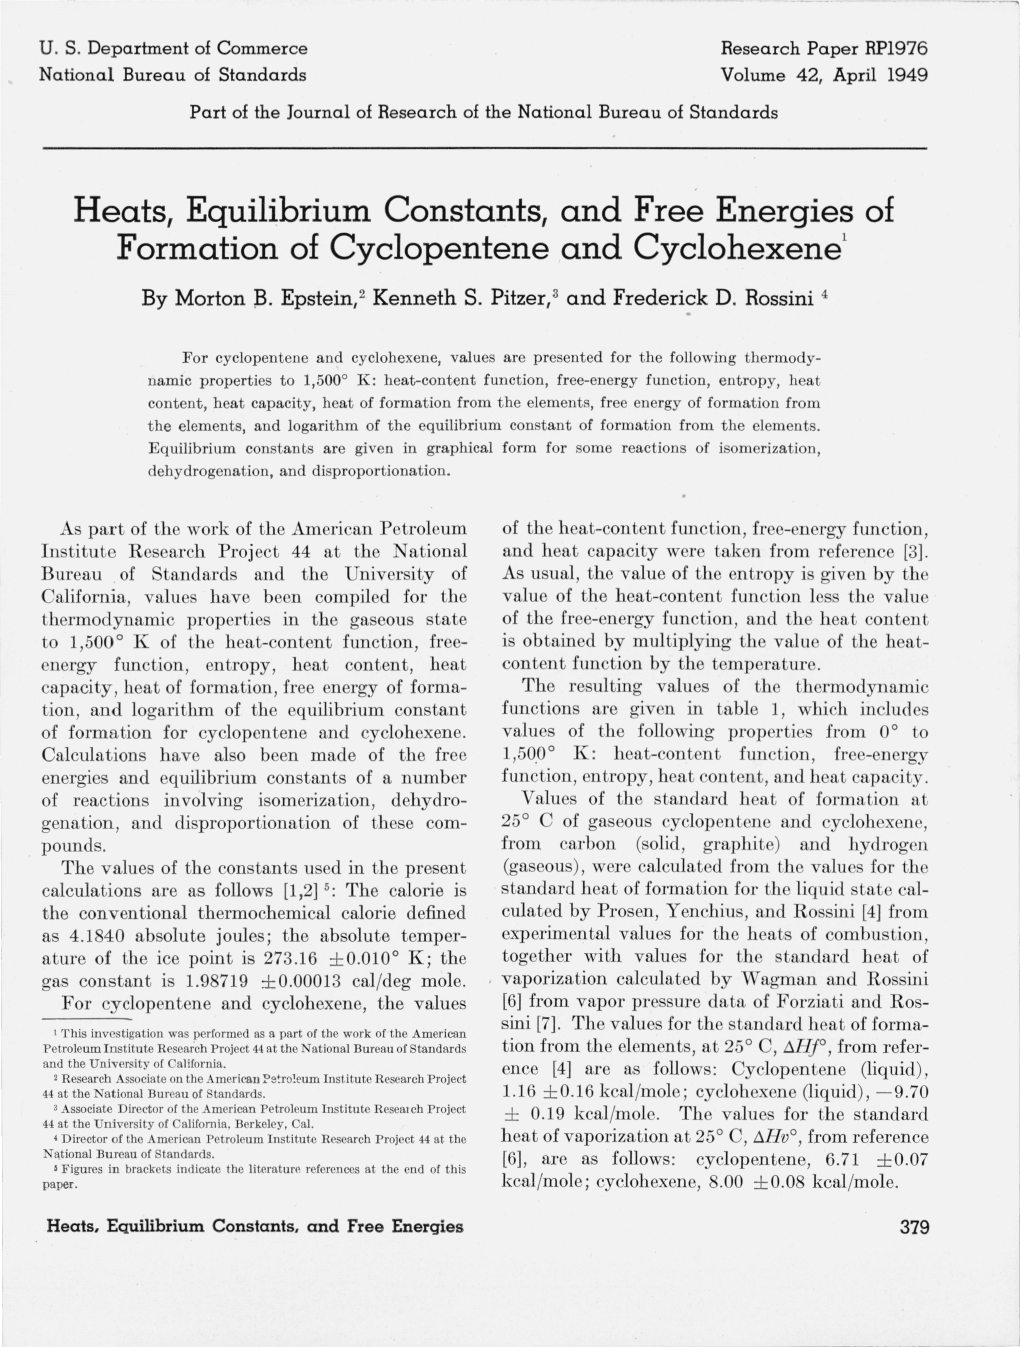 Heats, Equilibrium Constants, and Free Energies of Formation of Cyclopentene and Cyclohexene1